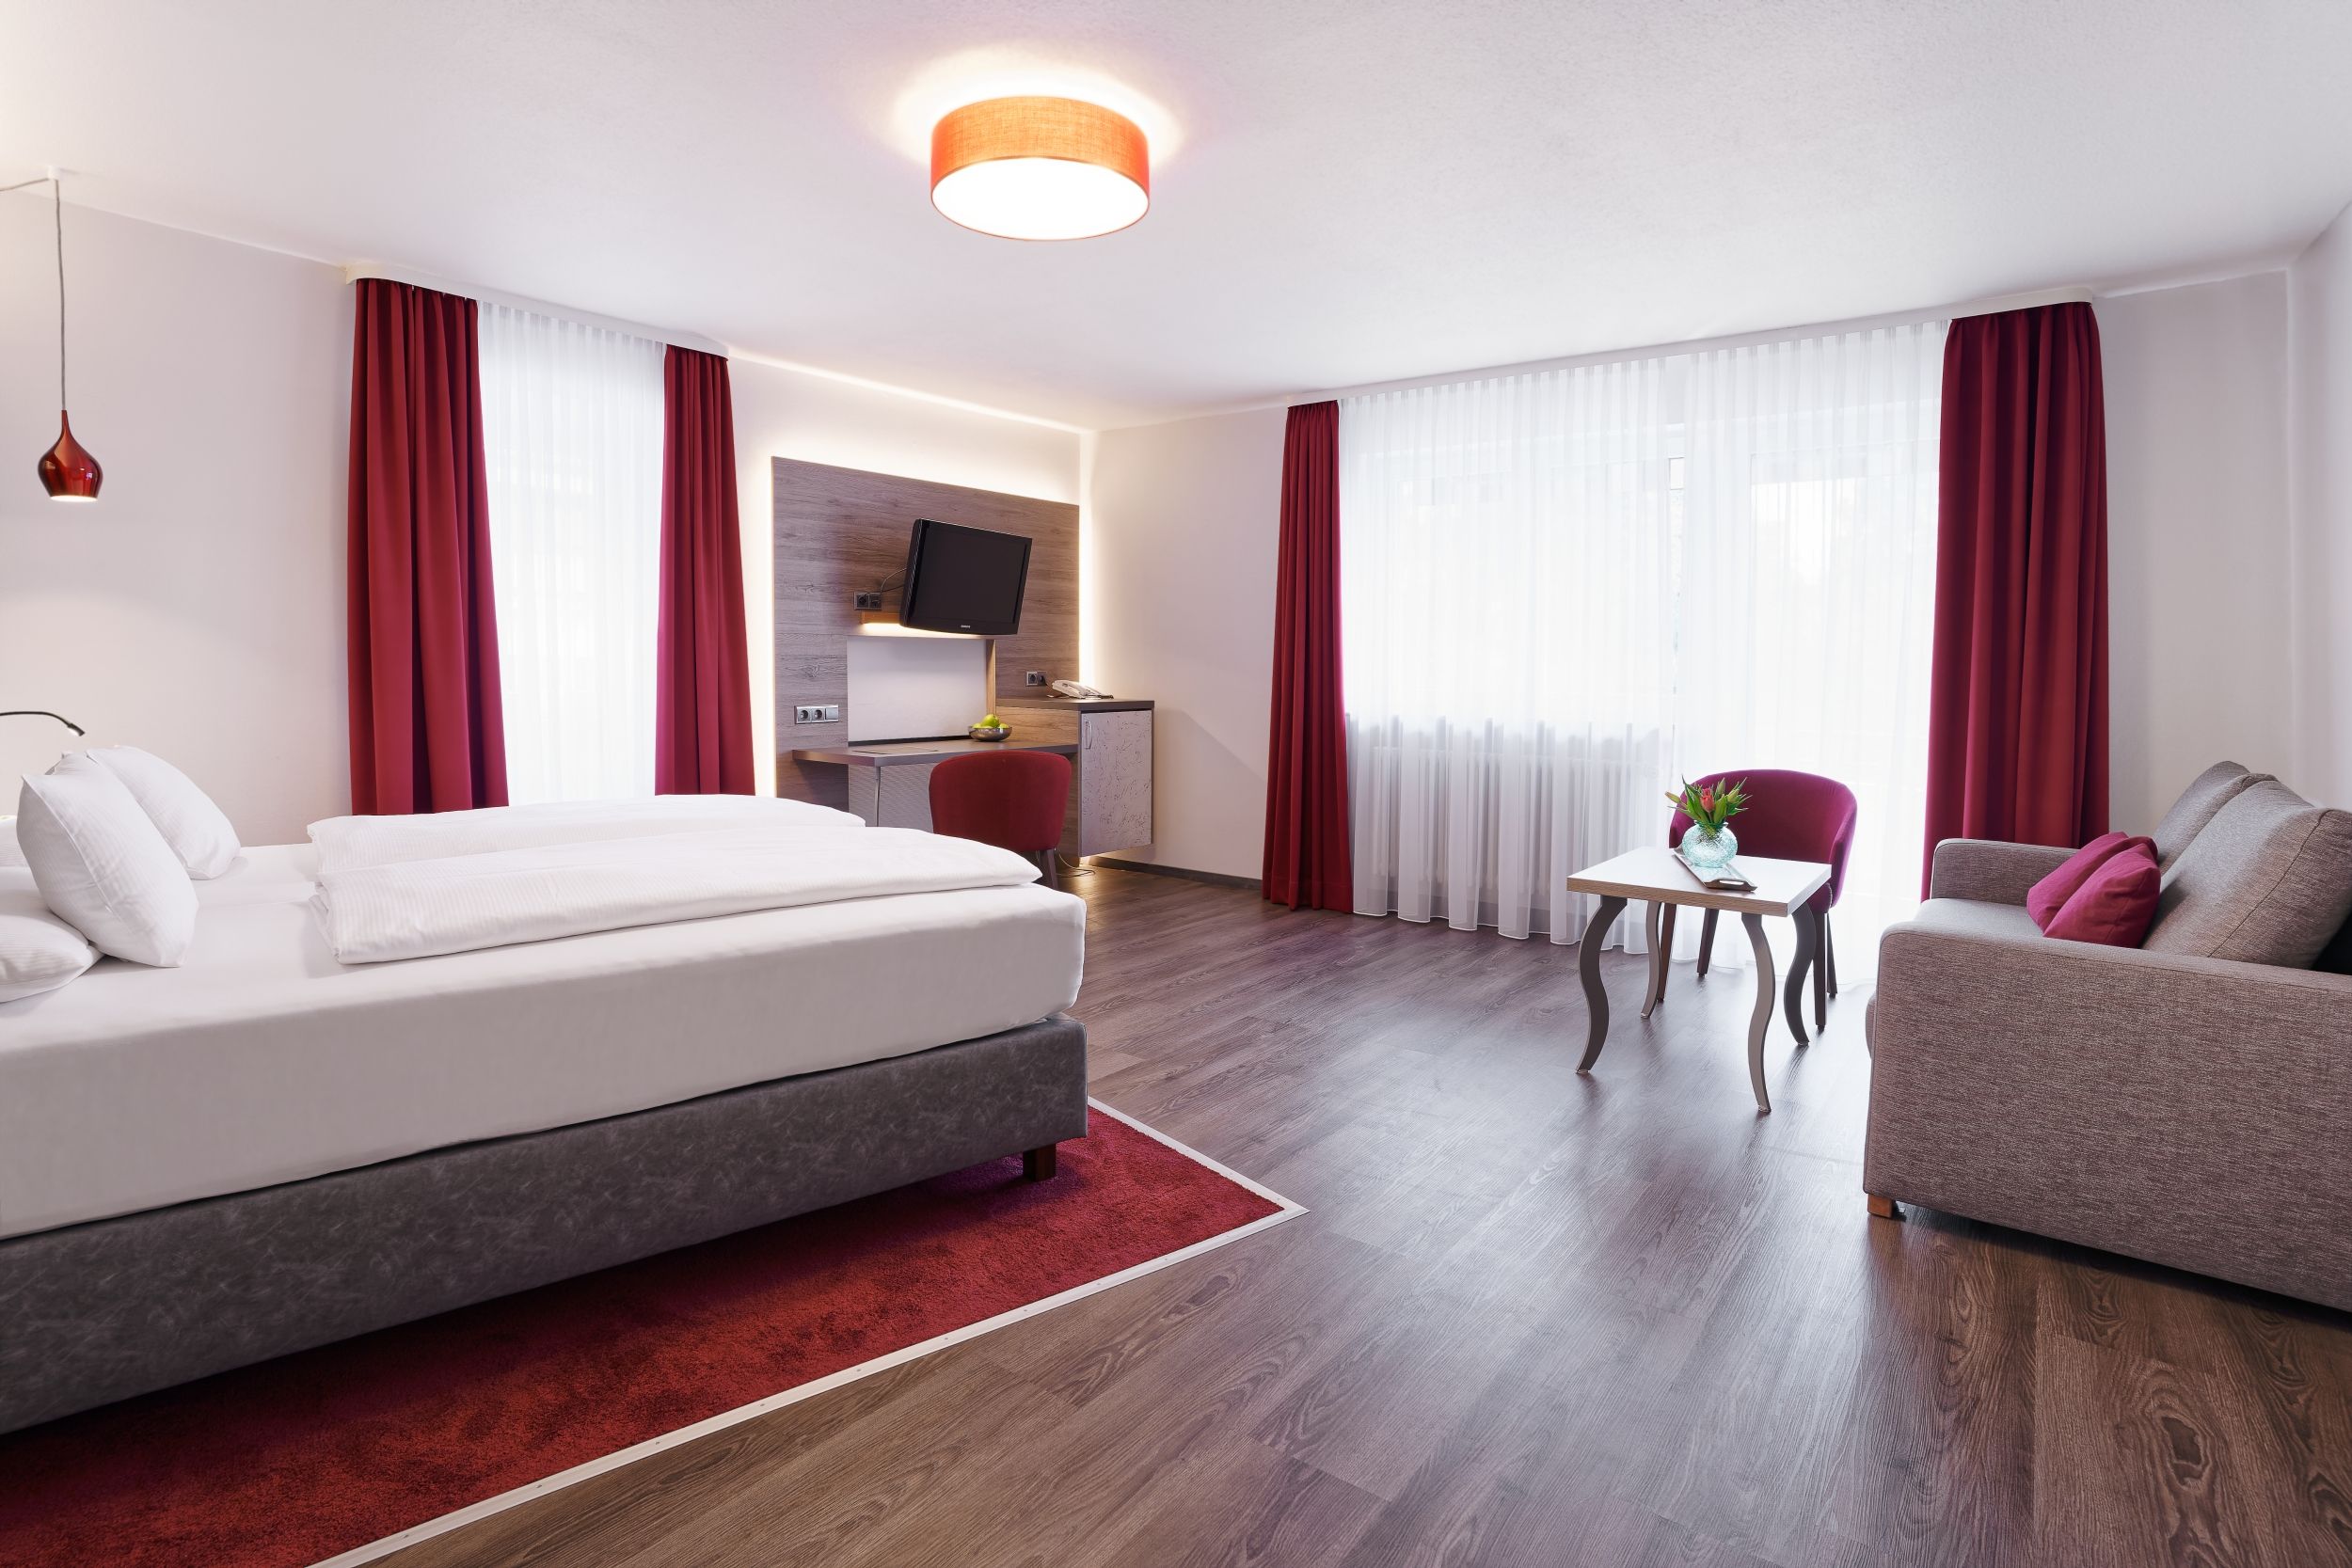 Suites at the Hotel Ritter Badenweiler